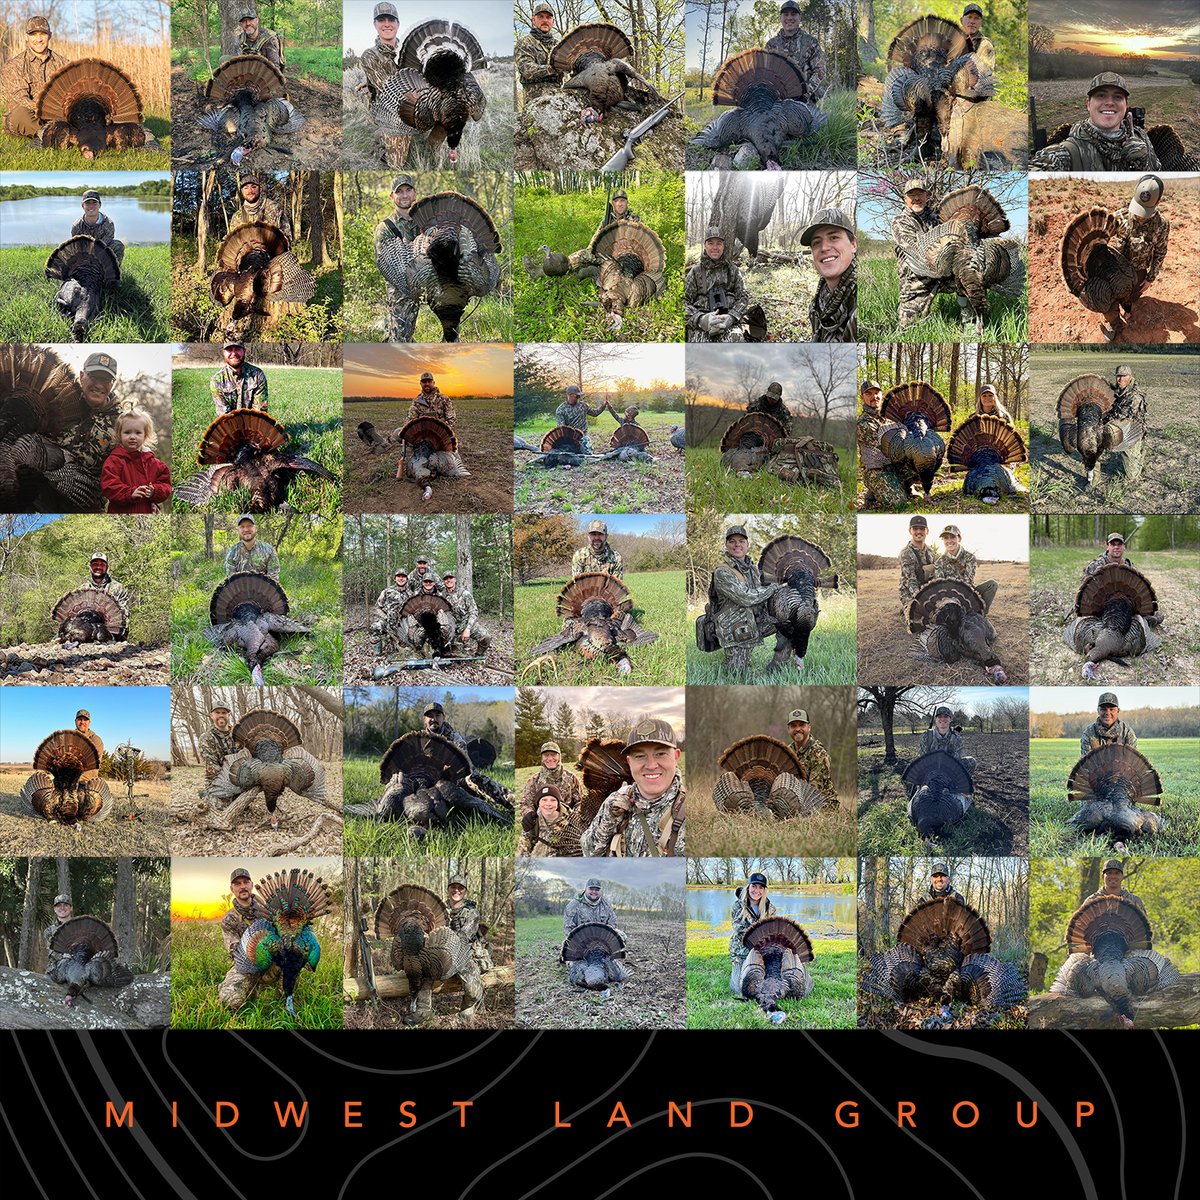 With most turkey seasons officially ending this evening, we hope everyone  had a fun and successful season, and made memories that will last a lifetime.

#MidwestLandGroup

#TurkeySeason #2023 #WeKnowLand #MLGDifference